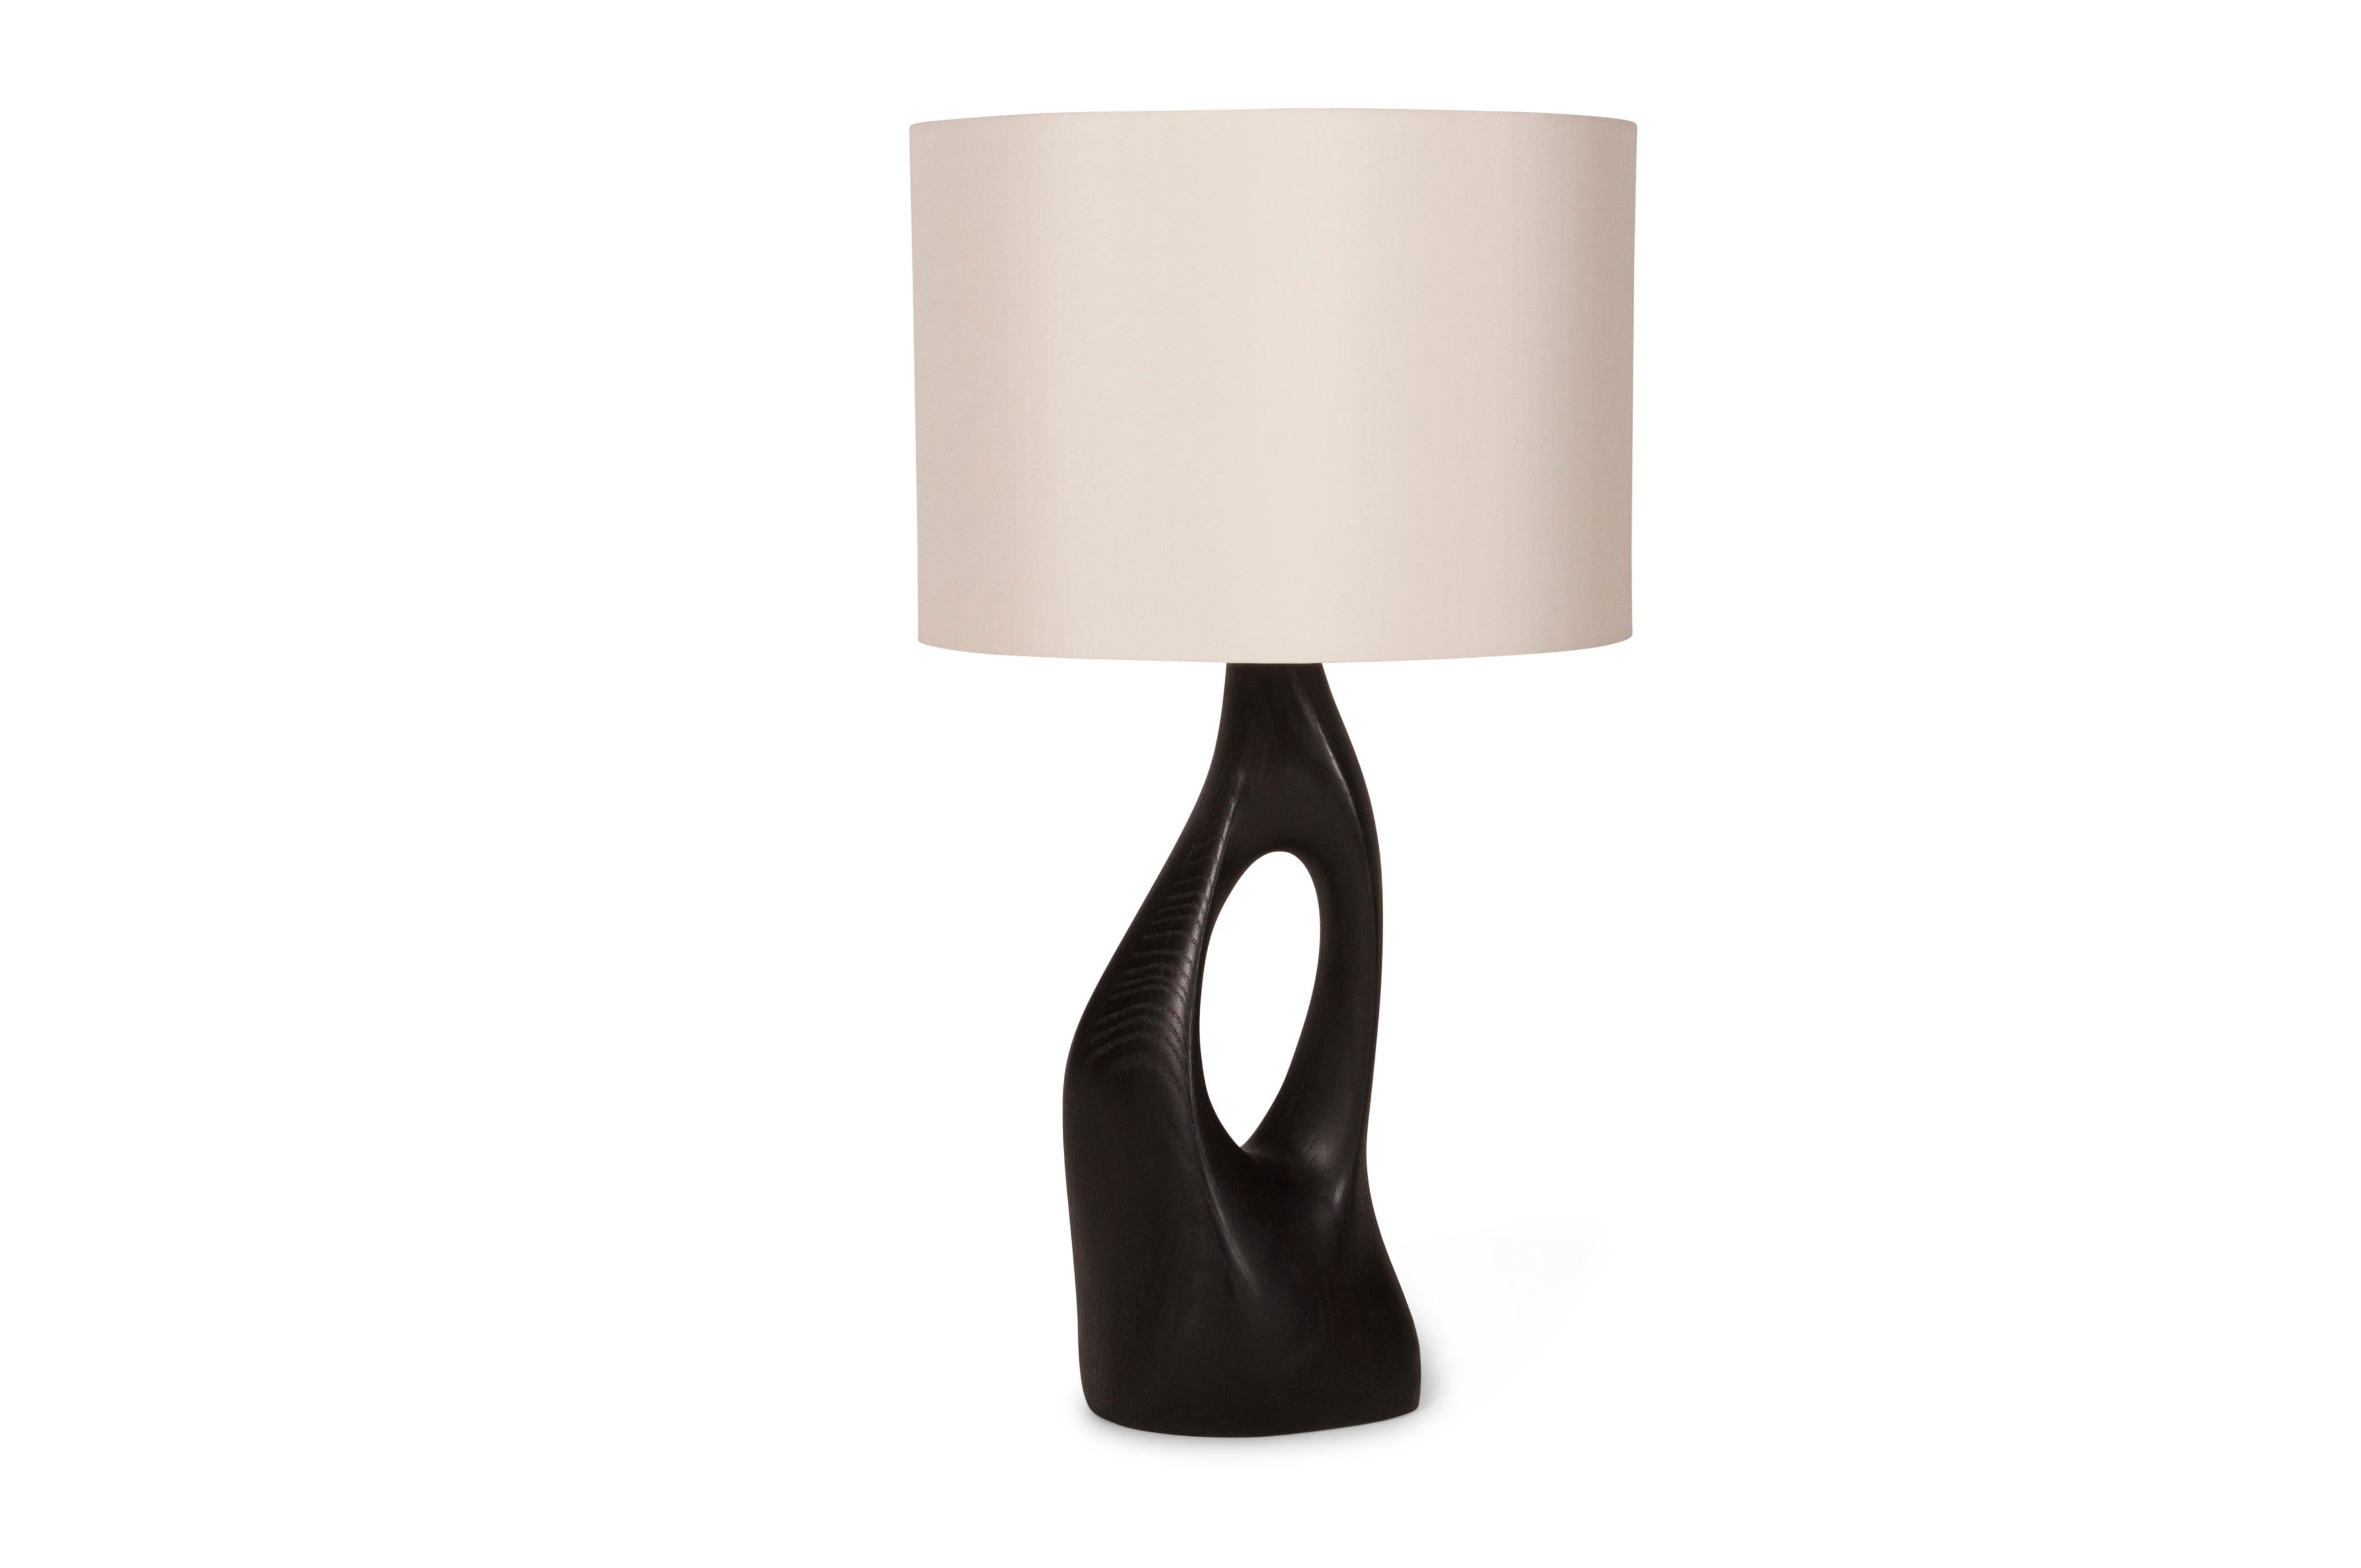 Modern Amorph Helix Table Lamp Solid Wood, Ebony Finish with Ivory Silk Shade For Sale